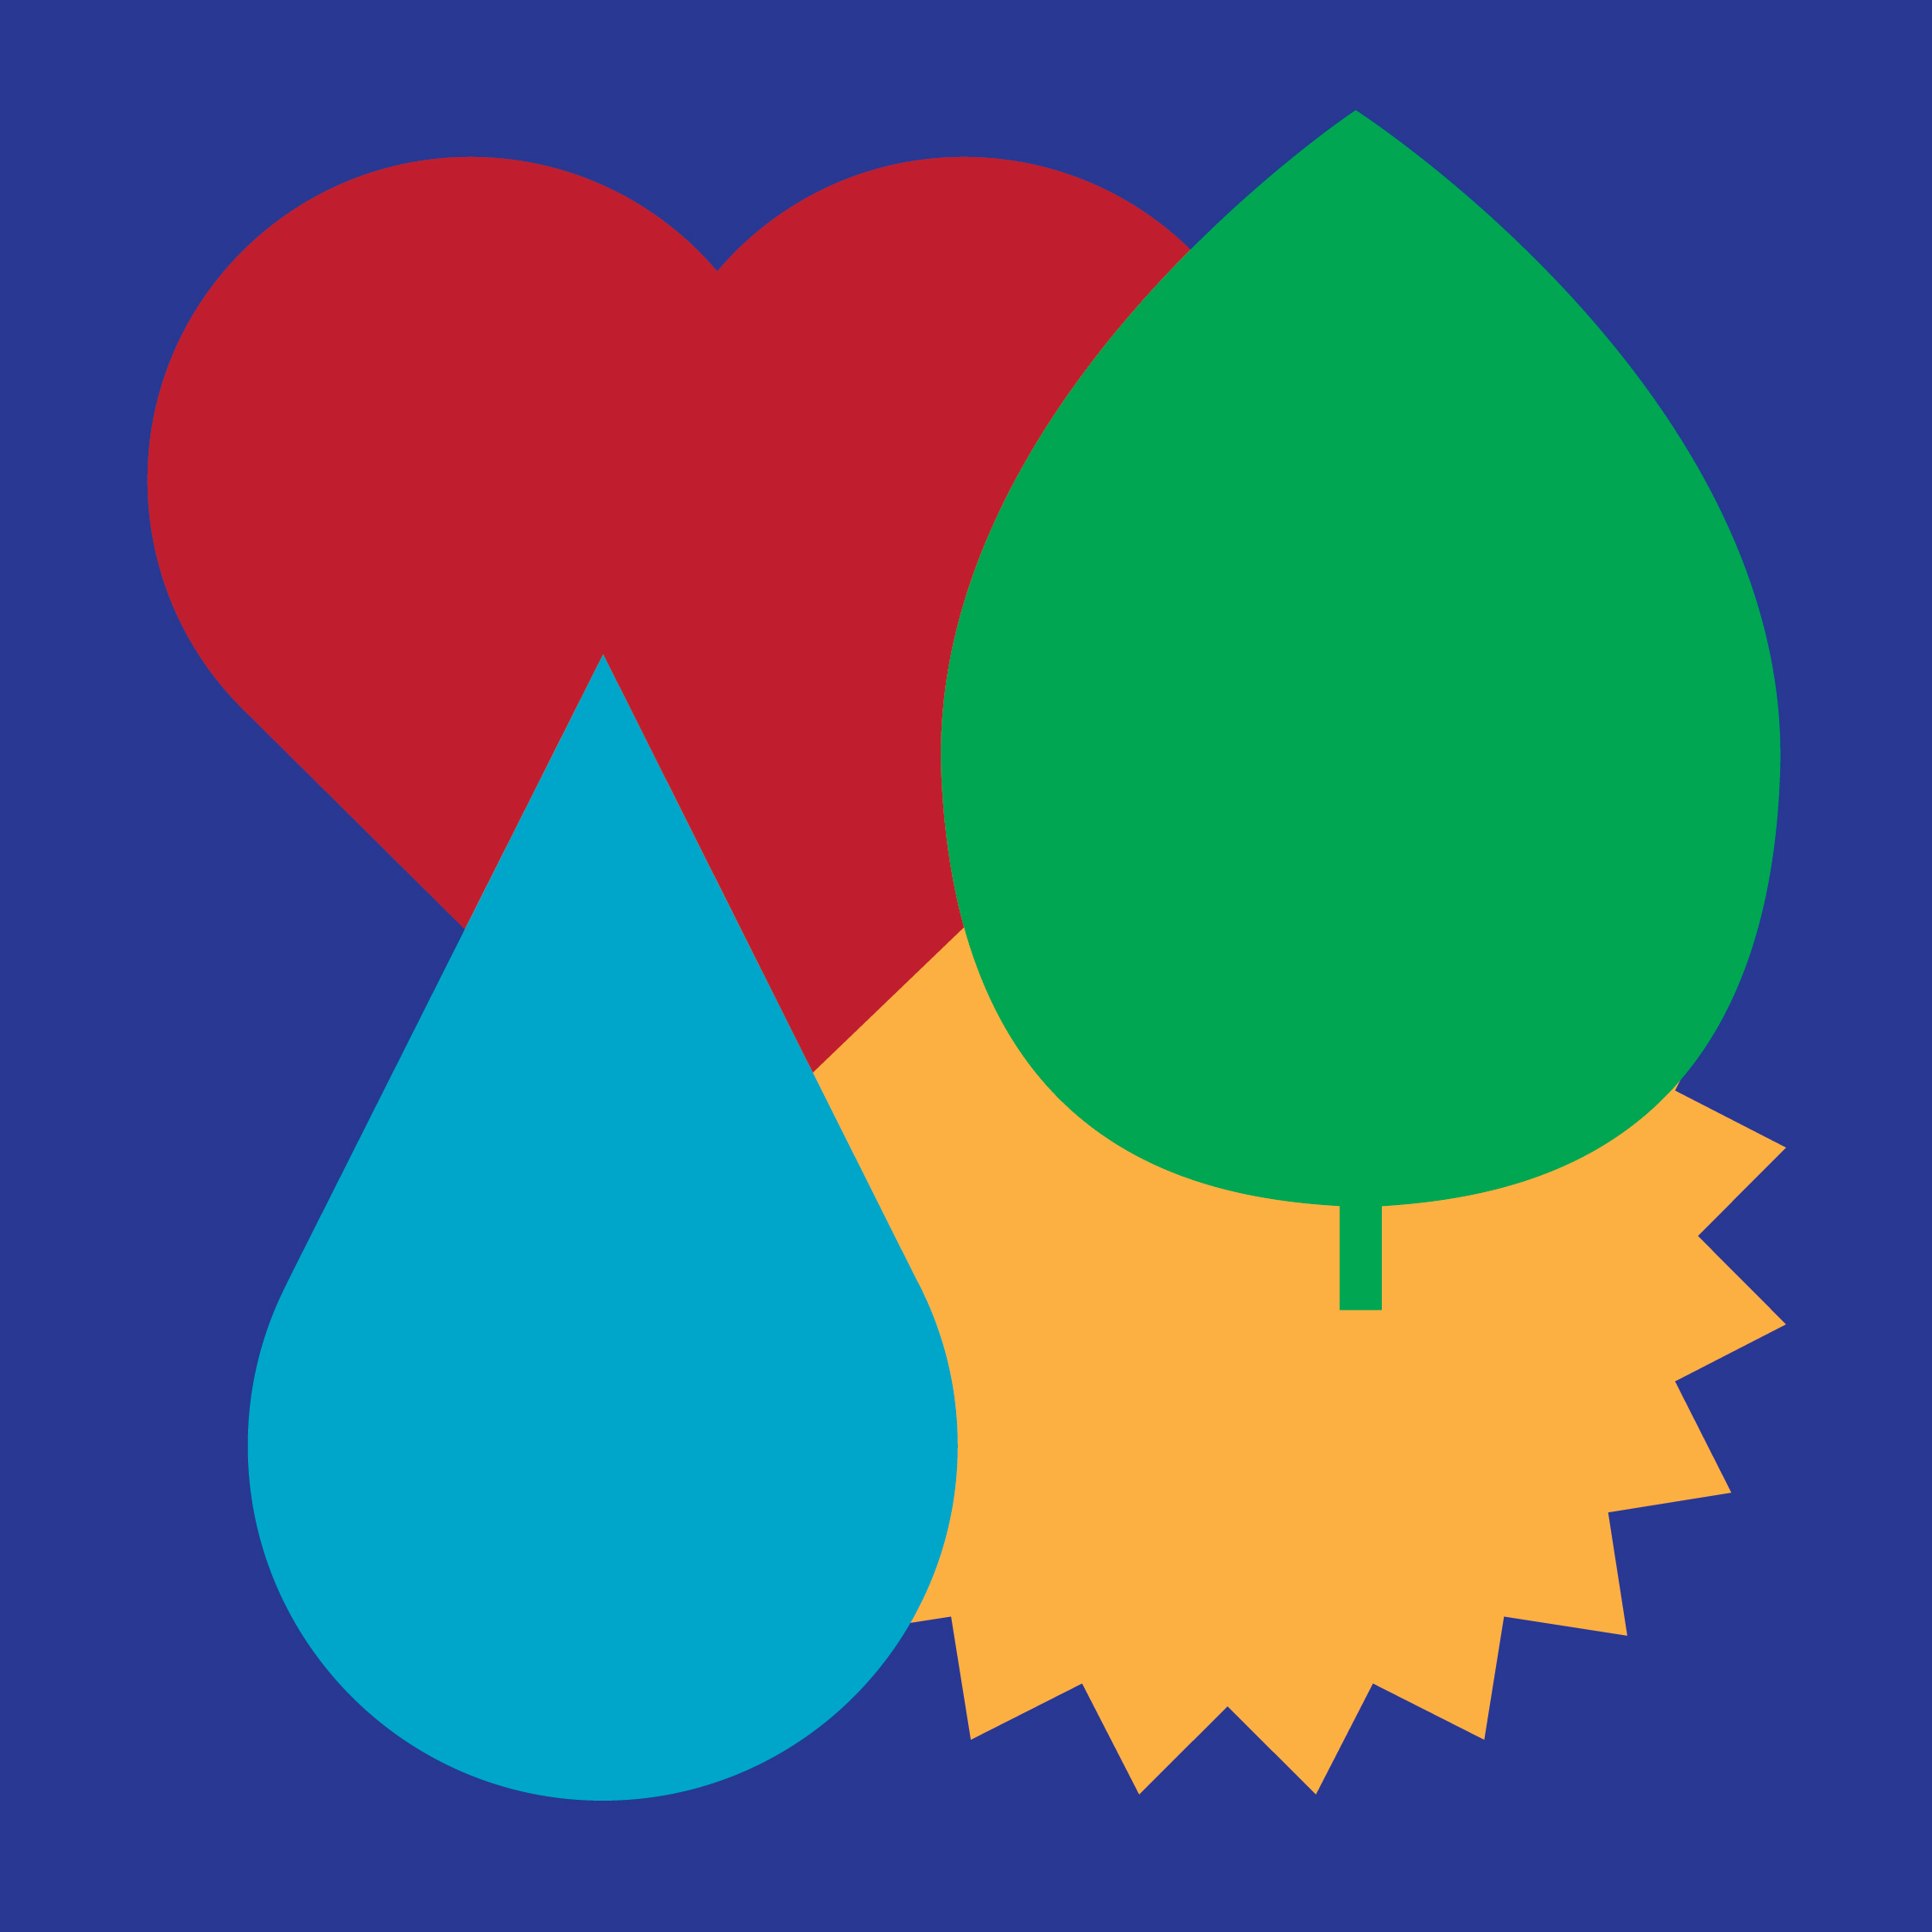 Red heart, green leaf, blue water droplet, and yellow sun on a dark background